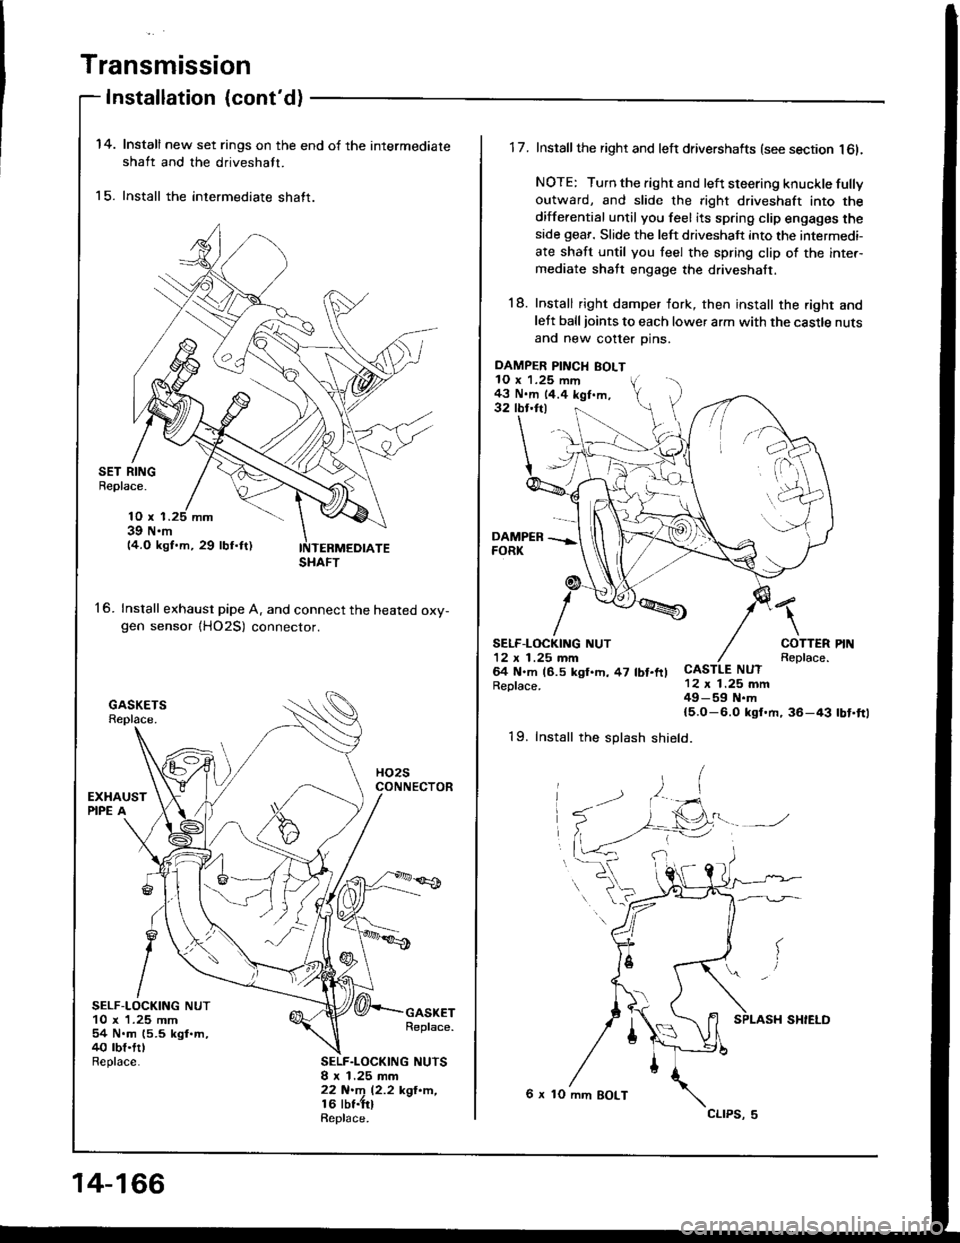 HONDA INTEGRA 1994 4.G Workshop Manual Transmission
Installation {contd)
14.
15.
Install new set rings on the end of the intermediate
shaft and the driveshaft.
Install the intermediate shaft.
SET RINGBeplace.
16.
10 x 139 N.m14.O kgf.m, 2